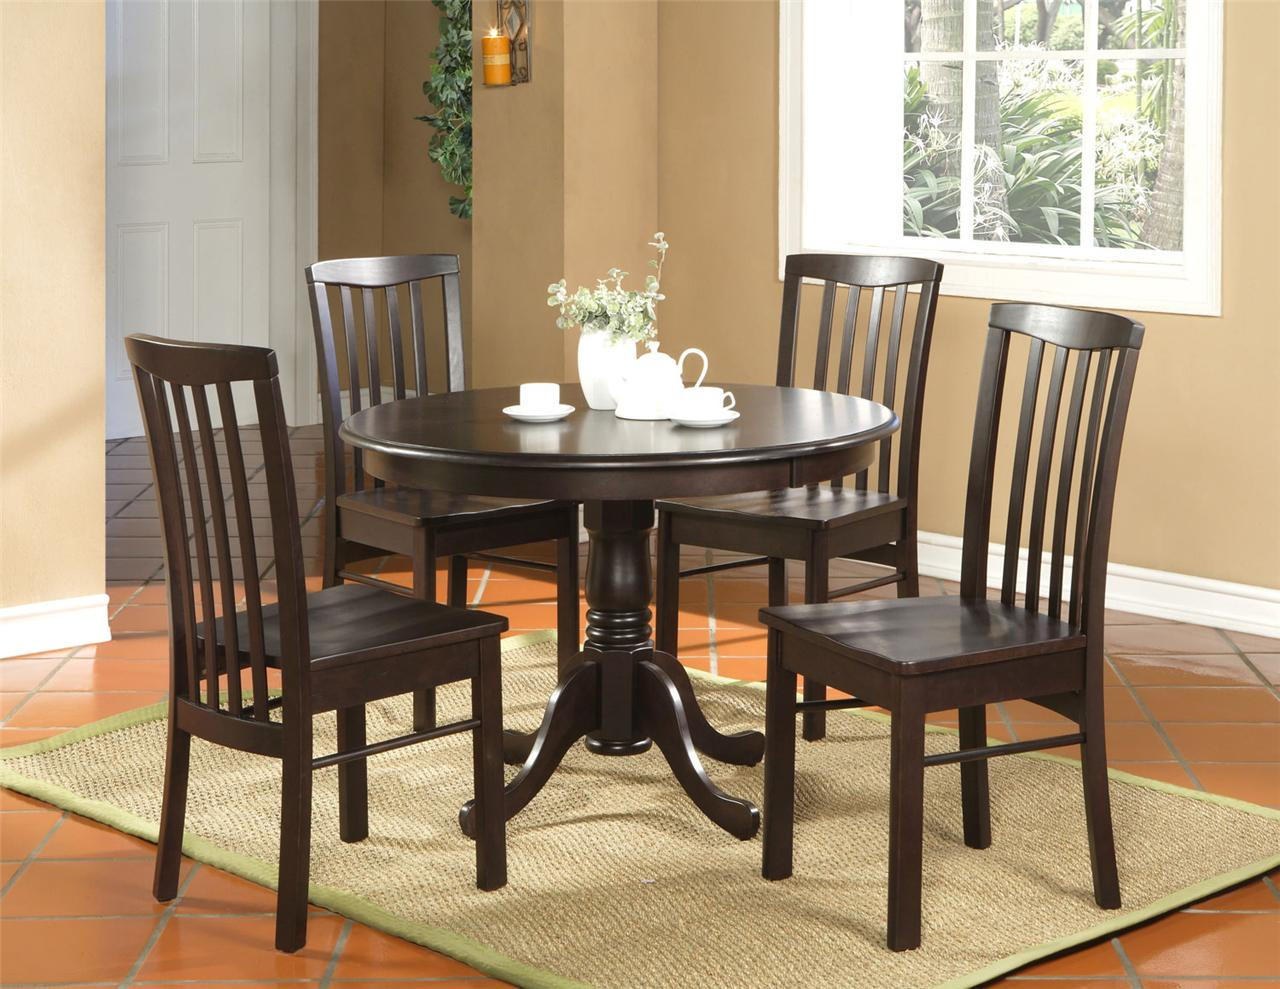 Small Kitchen Table For 4
 5PC ROUND KITCHEN DINETTE SET TABLE AND 4 CHAIRS WALNUT